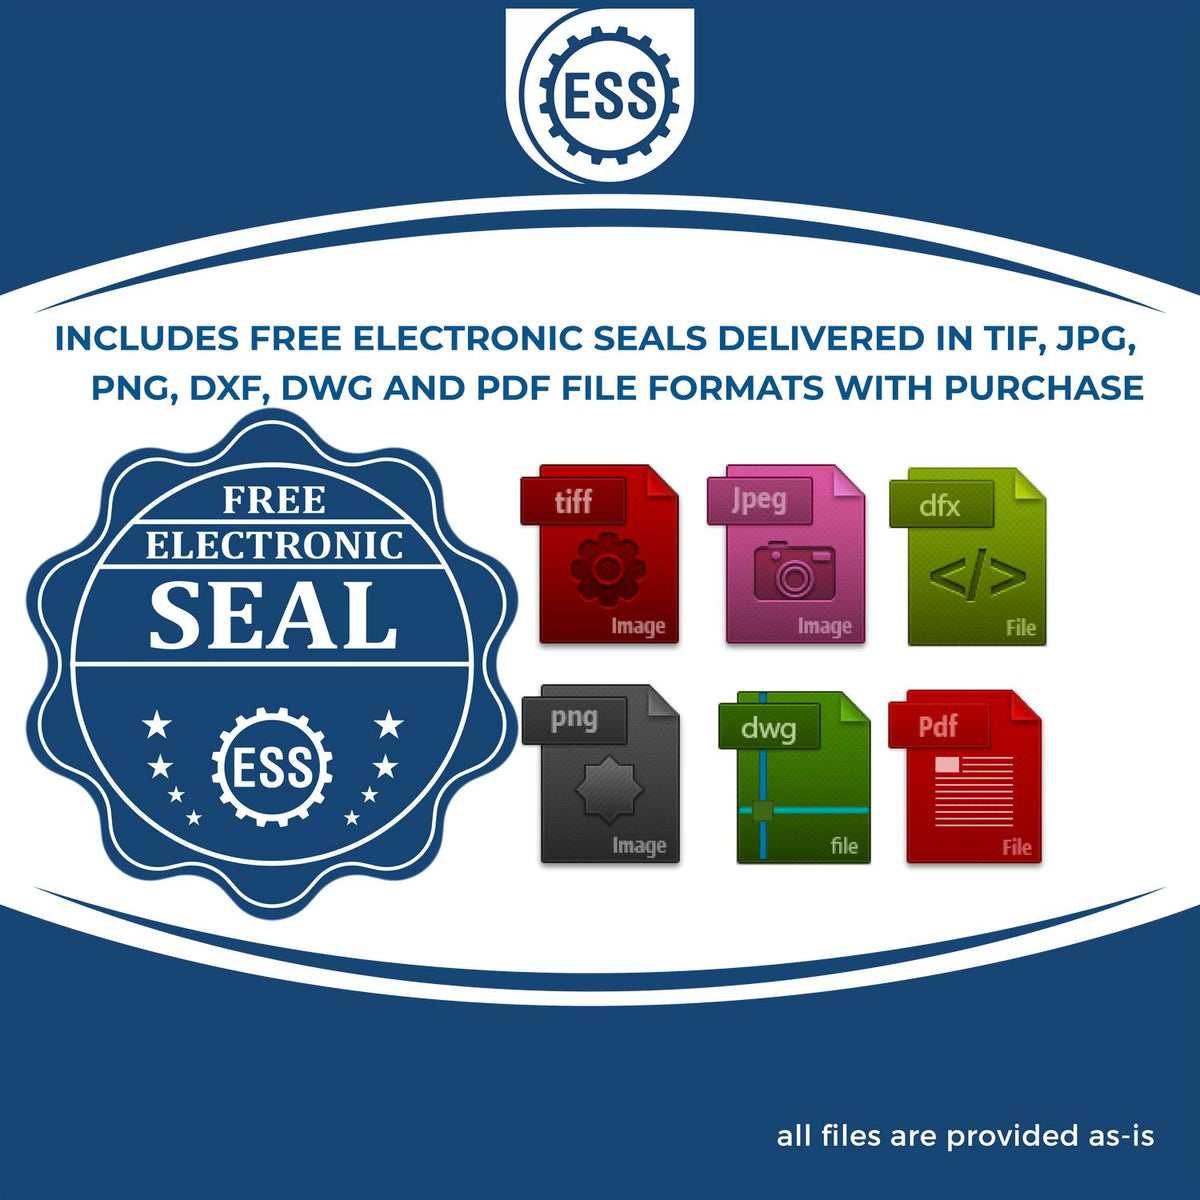 An infographic for the free electronic seal for the Heavy-Duty Washington Rectangular Notary Stamp illustrating the different file type icons such as DXF, DWG, TIF, JPG and PNG.